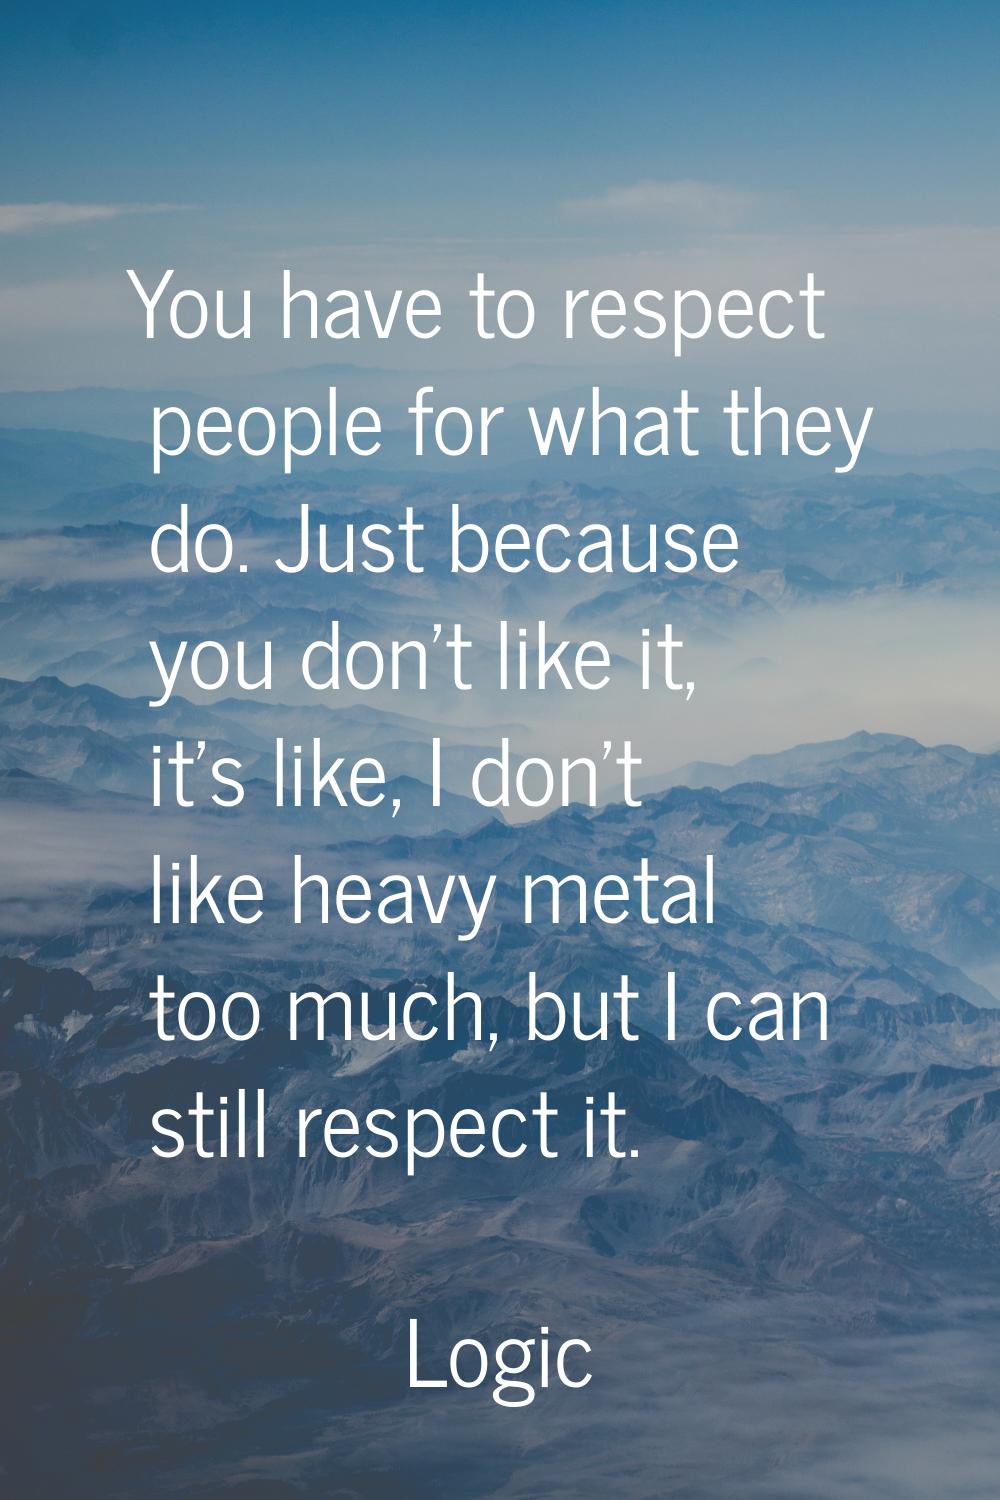 You have to respect people for what they do. Just because you don't like it, it's like, I don't lik